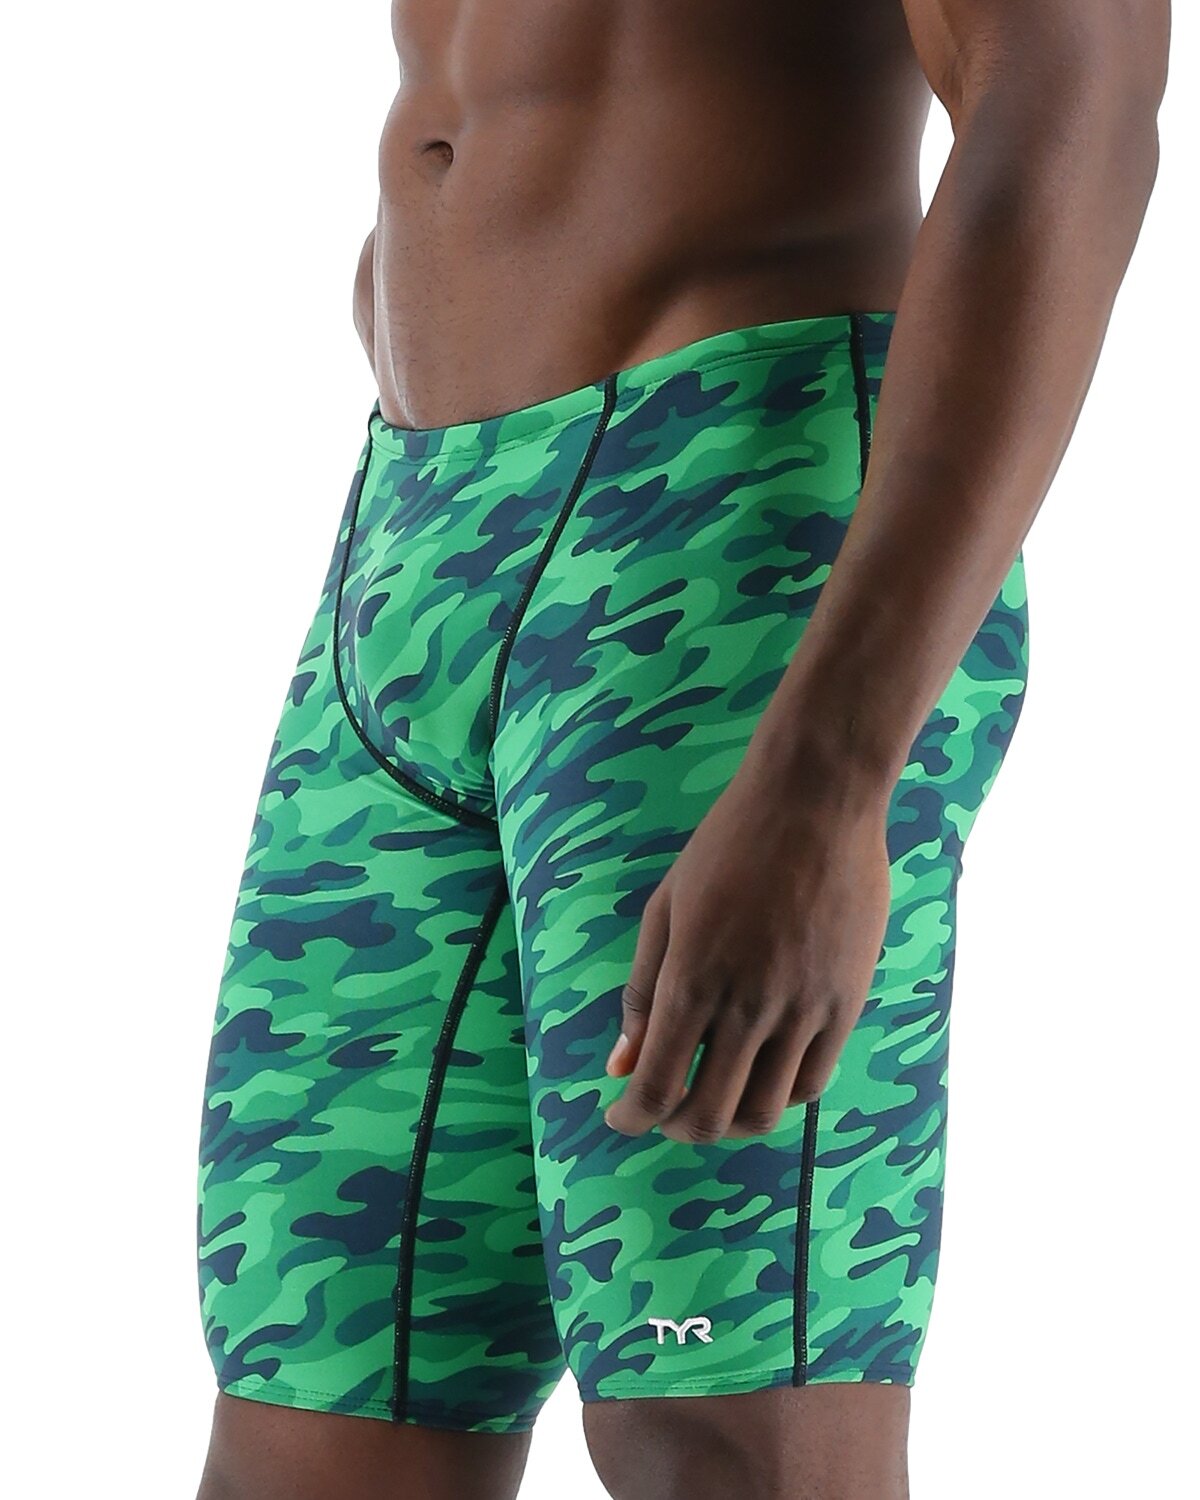 TYR Green Camo Jammer Size 24